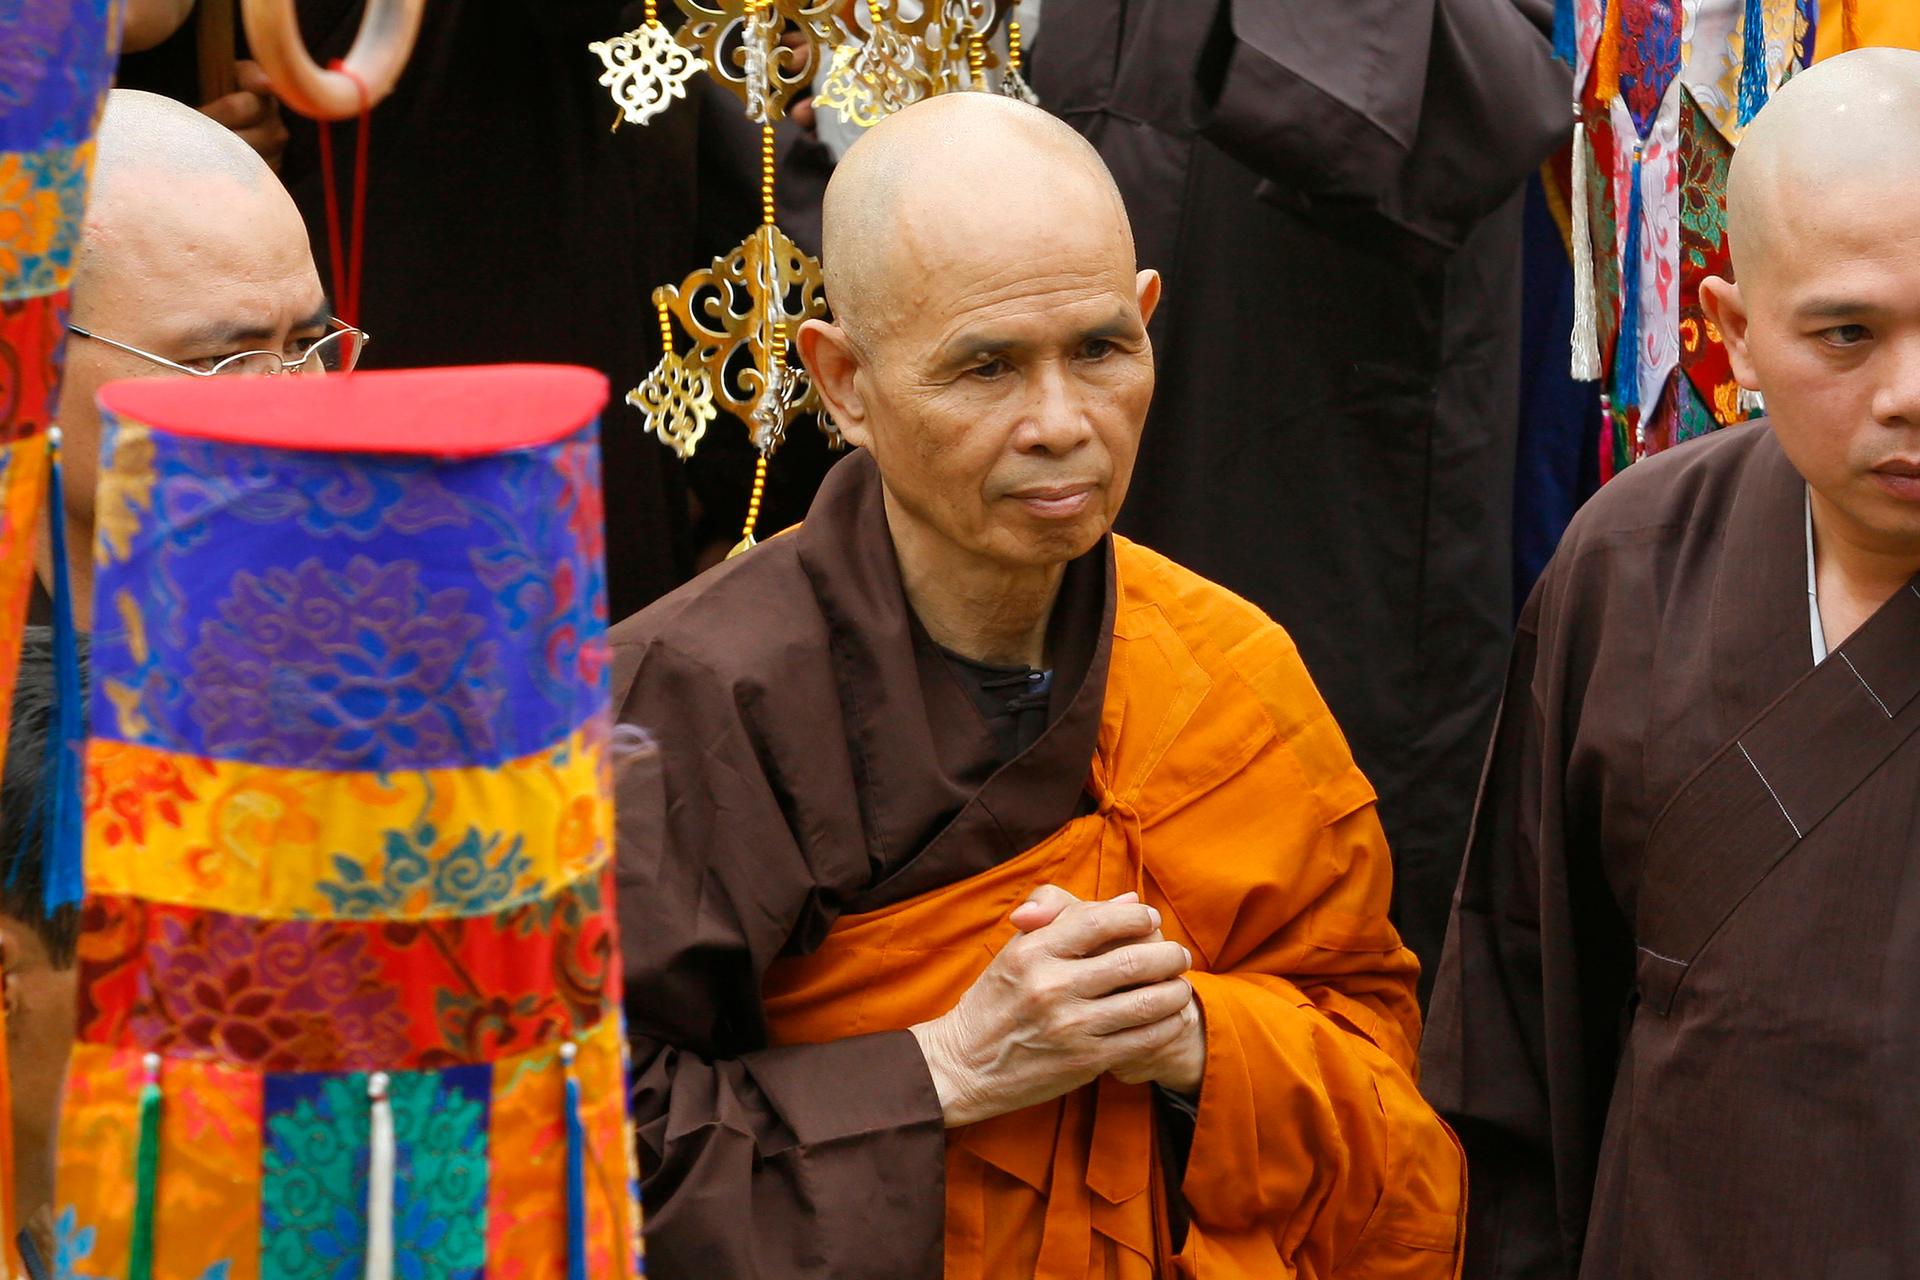 Vietnamese Zen master Thich Nhat Hanh, center, arrives for a great chanting ceremony at Vinh Nghiem Pagoda in Ho Chi Minh City, Vietnam on March 16, 2007.